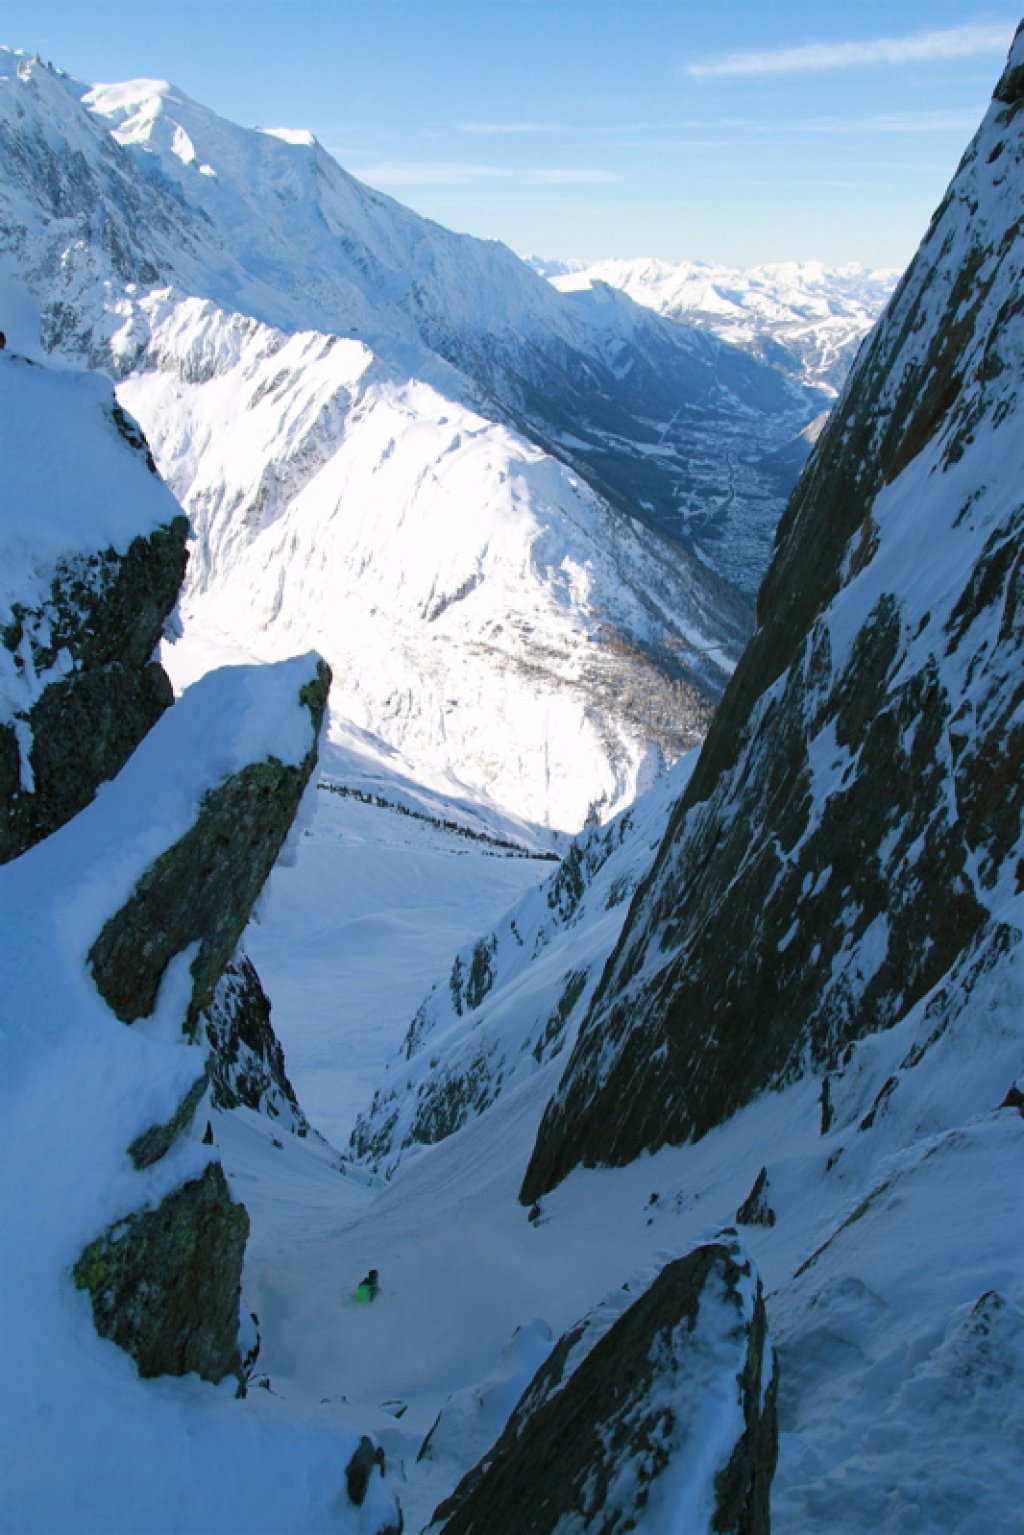 Sam Anthamatten lets it rip in the Poubelle Couloir with his 195 AMPerage.